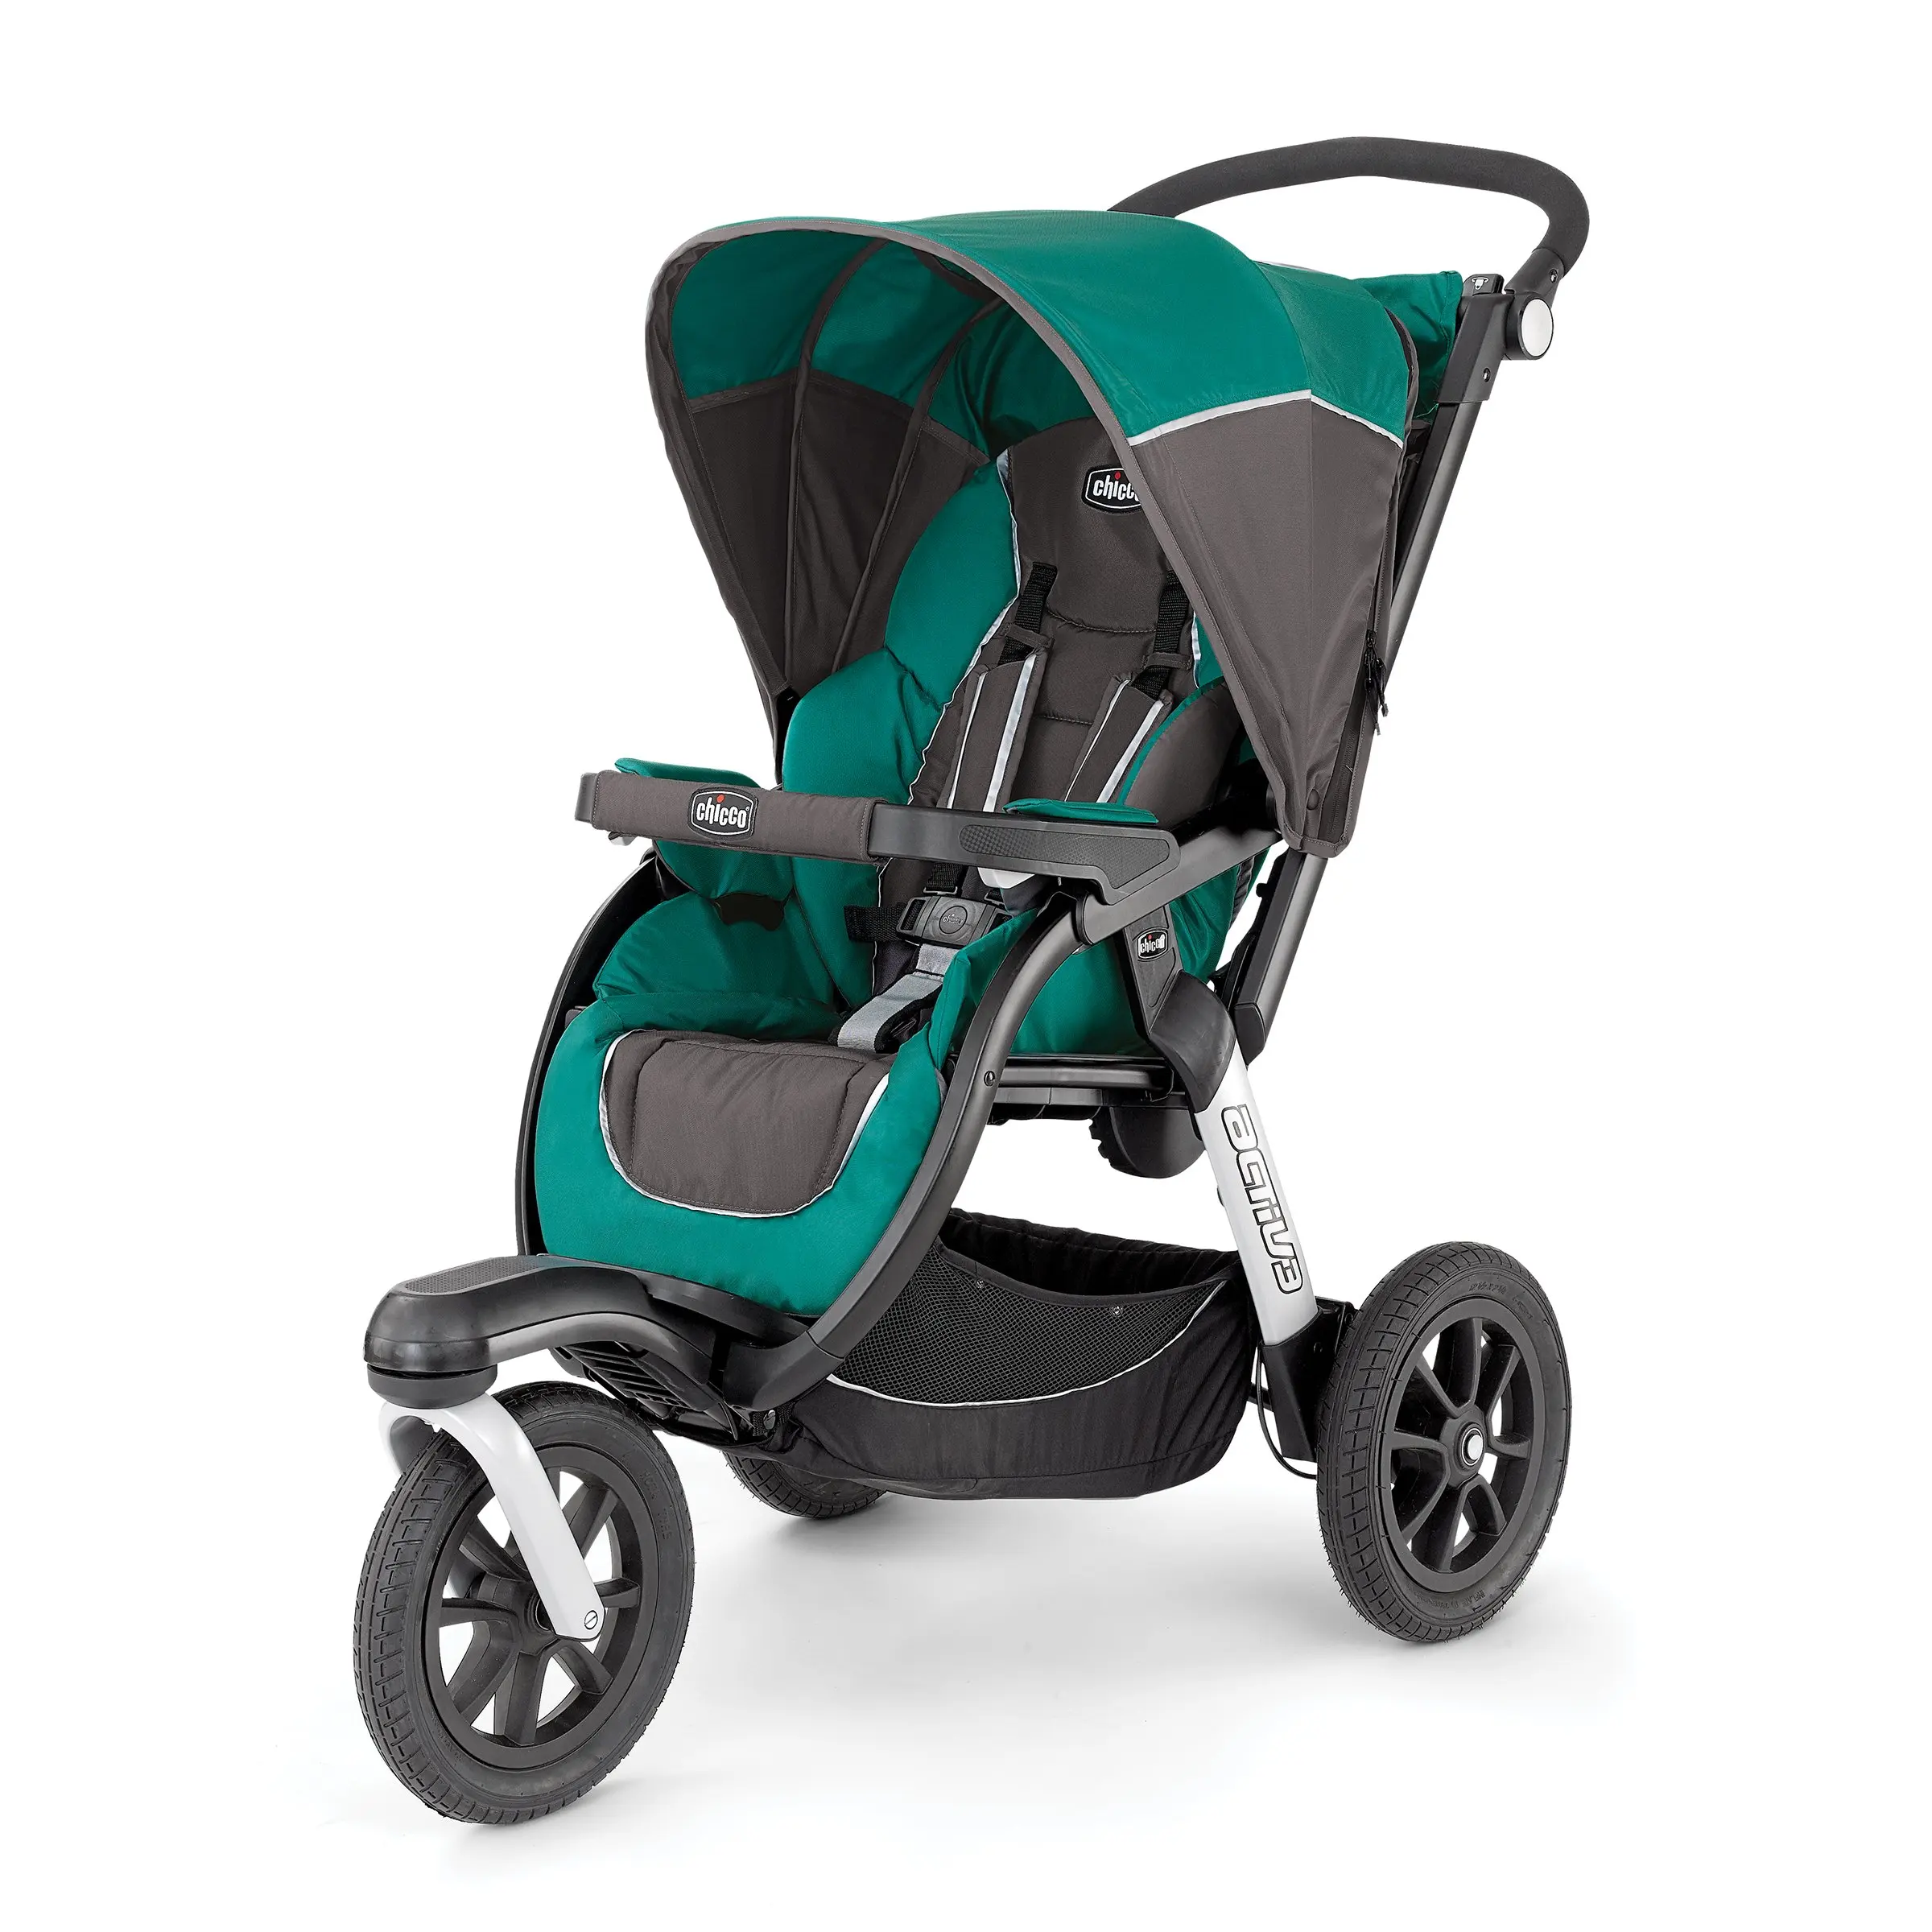 Cheap Chicco Stroller Replacement Parts, find Chicco Stroller